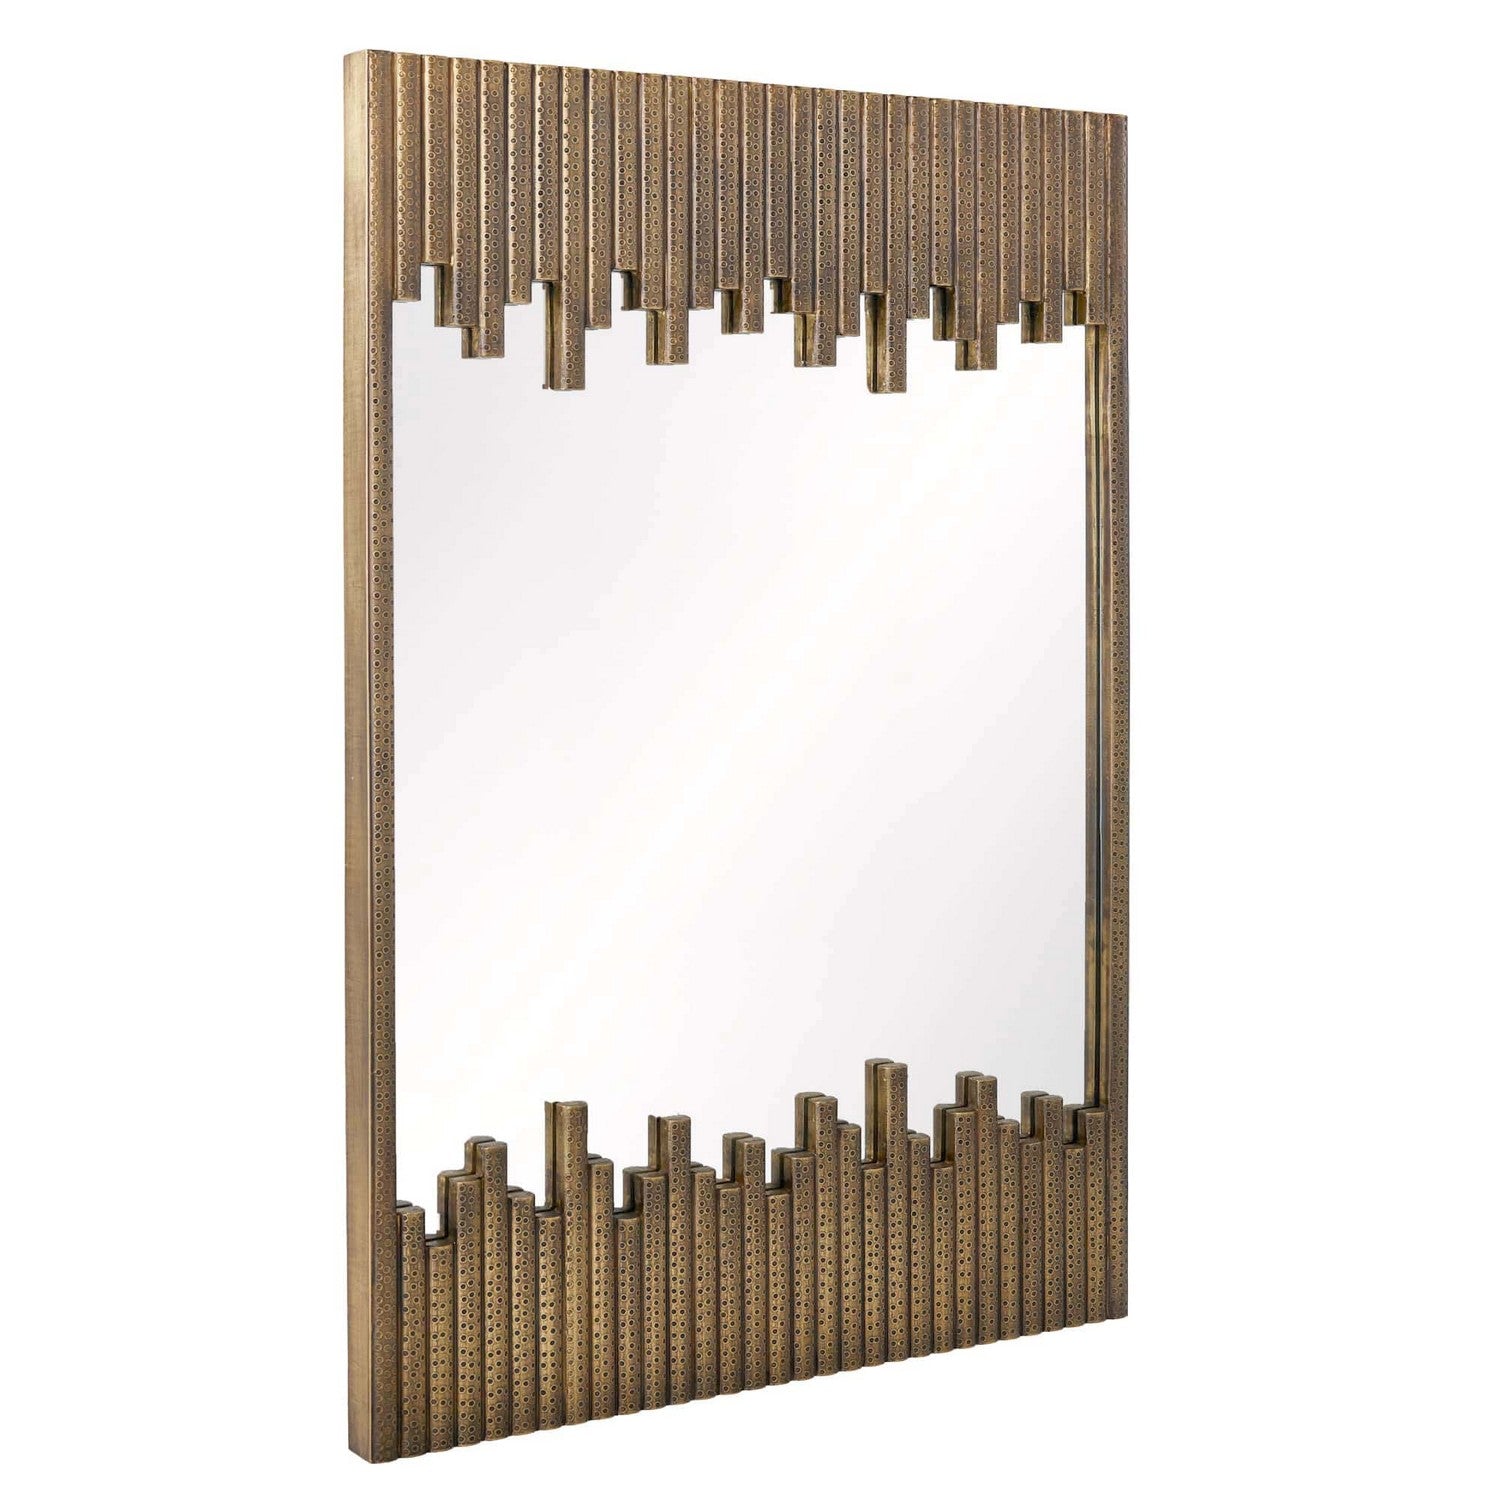 Mirror from the Vidalia collection in Antique Brass finish